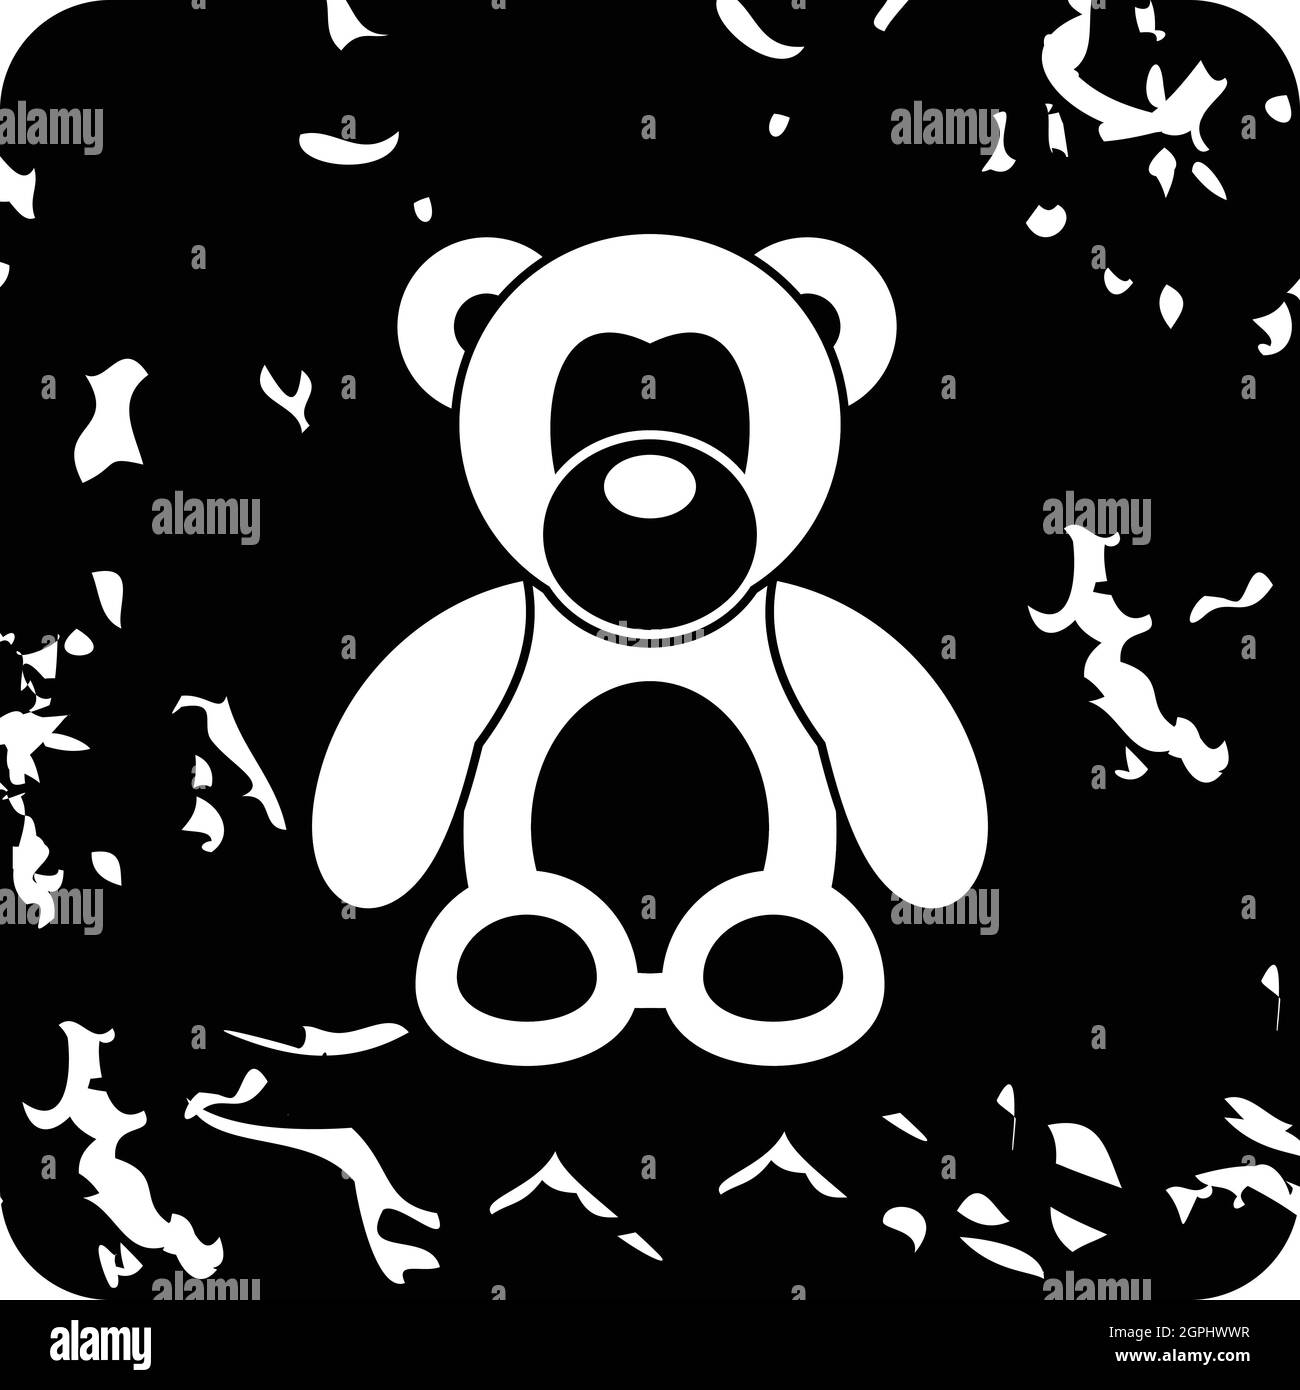 Toy bear icon, grunge style Stock Vector